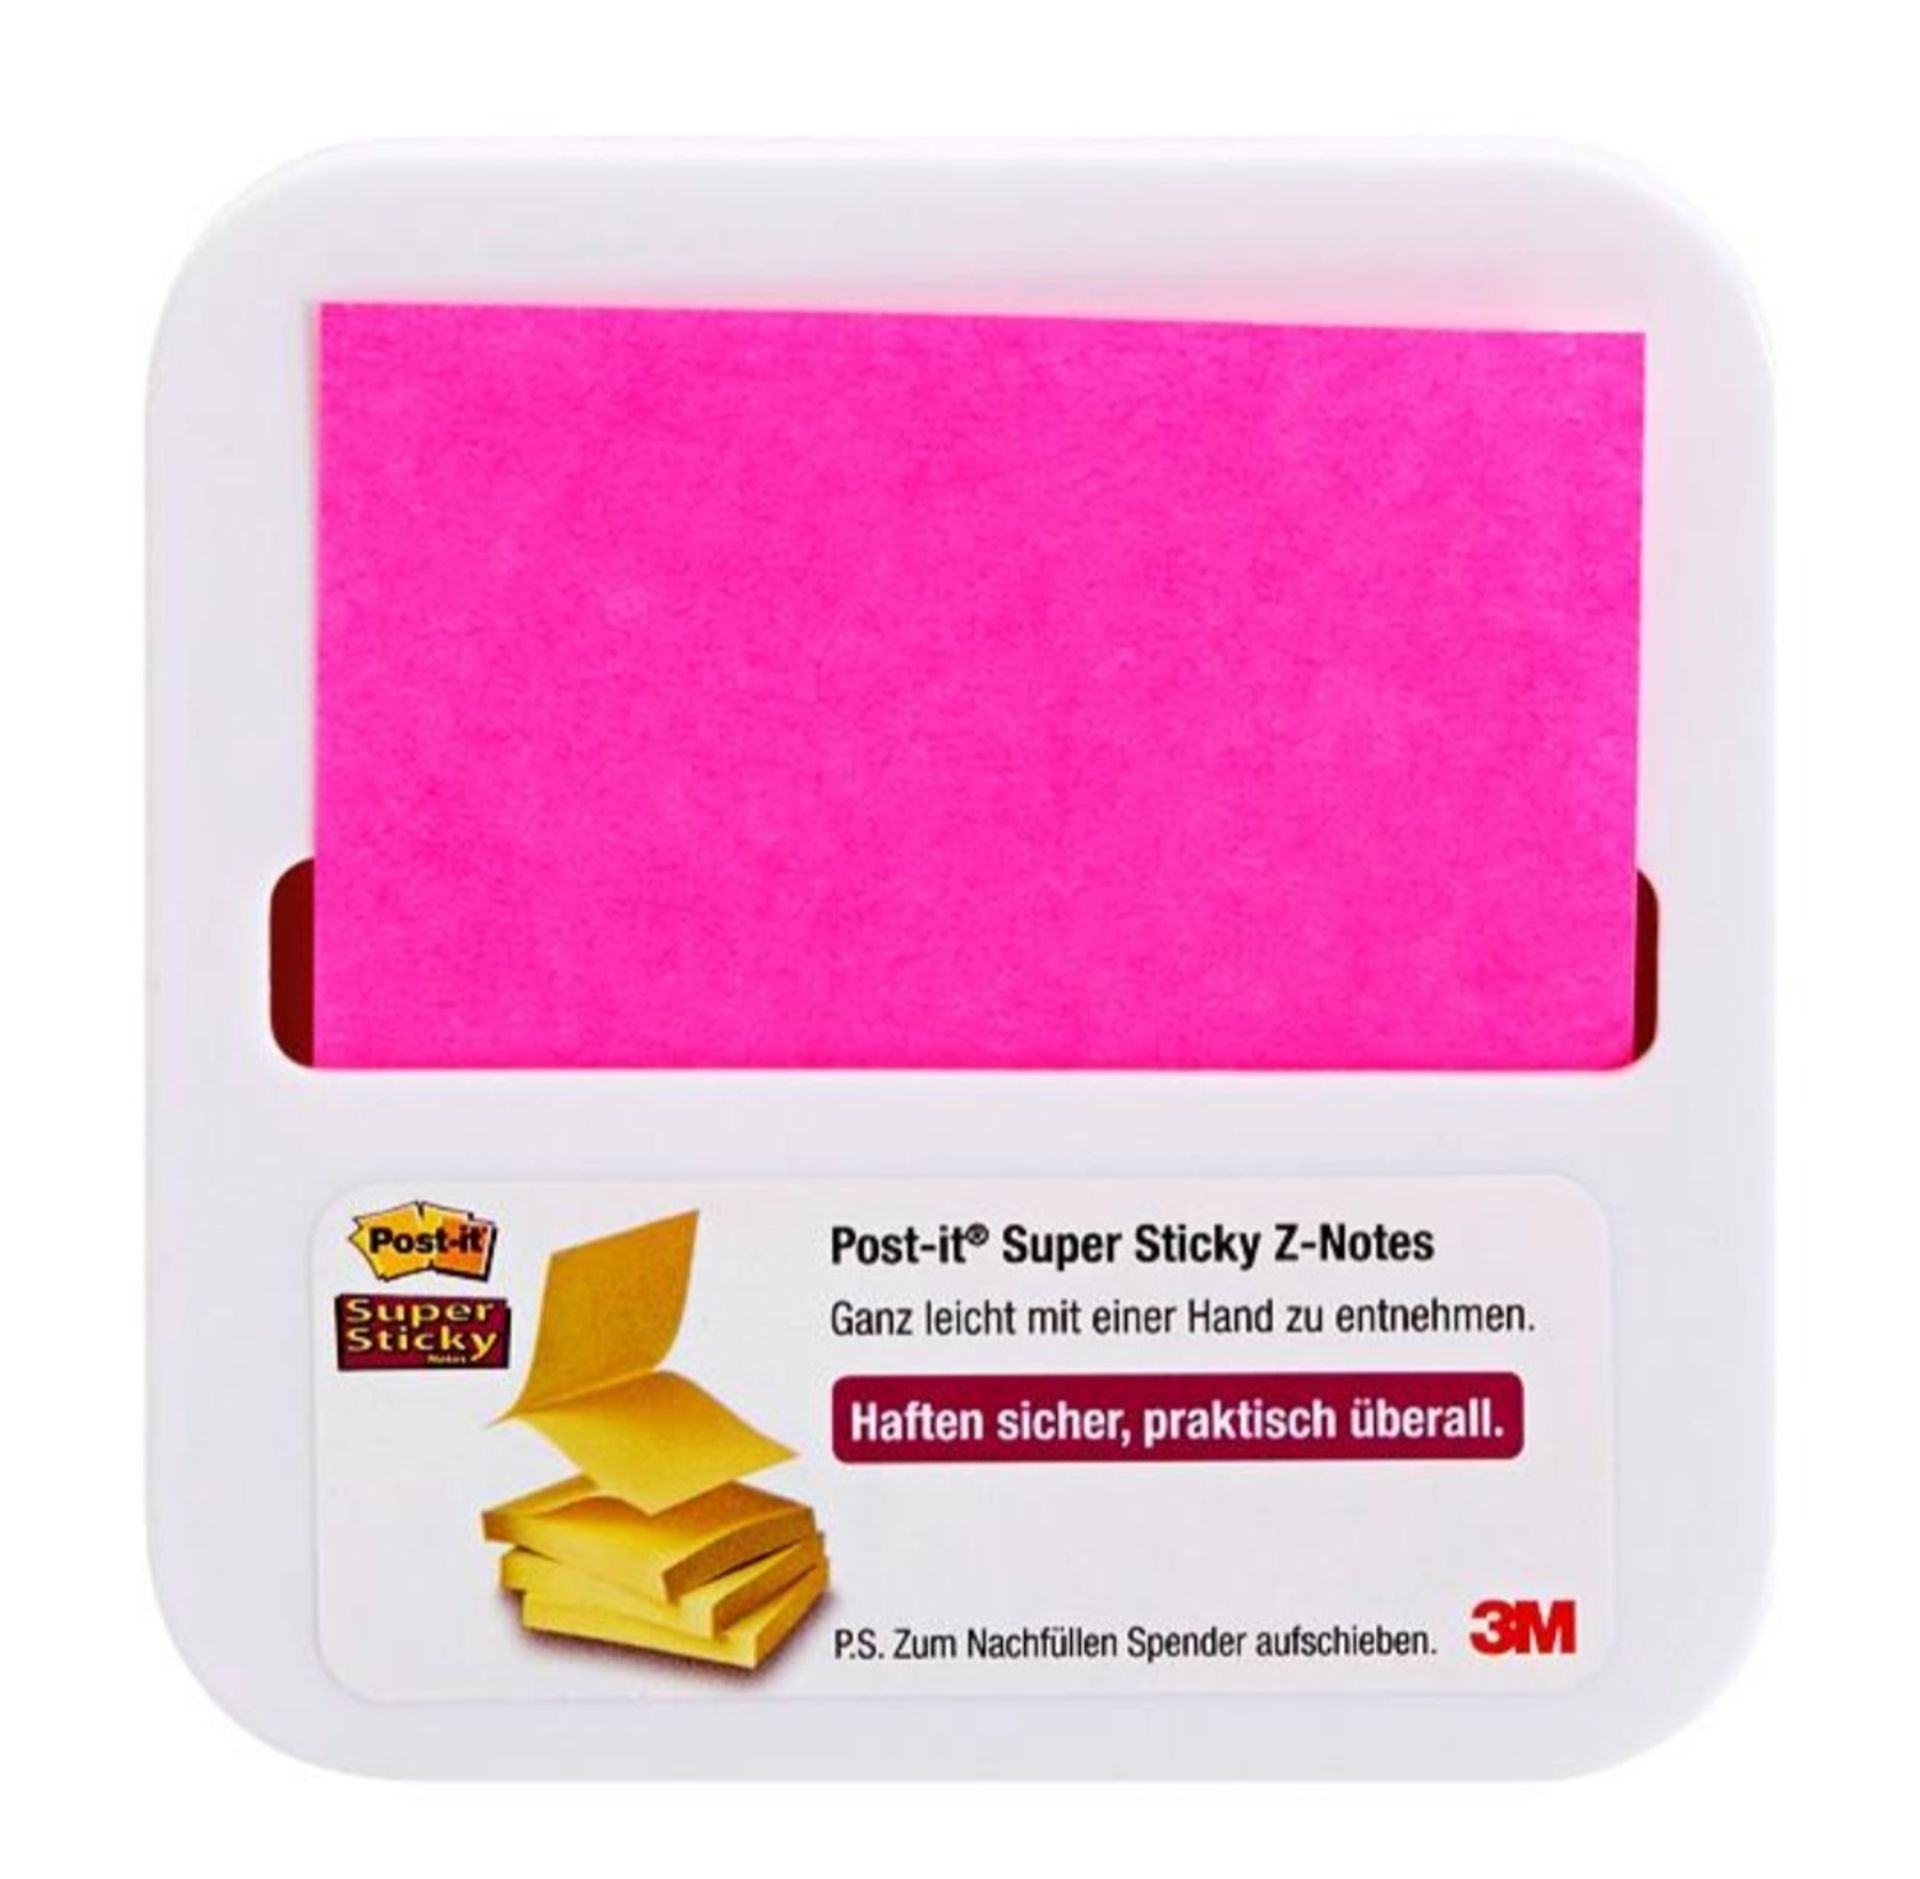 X 12 BRAND NEW POST-IT SUPER STICKY Z-NOTES ON DISPENSR, TOTAL RRP £35.88